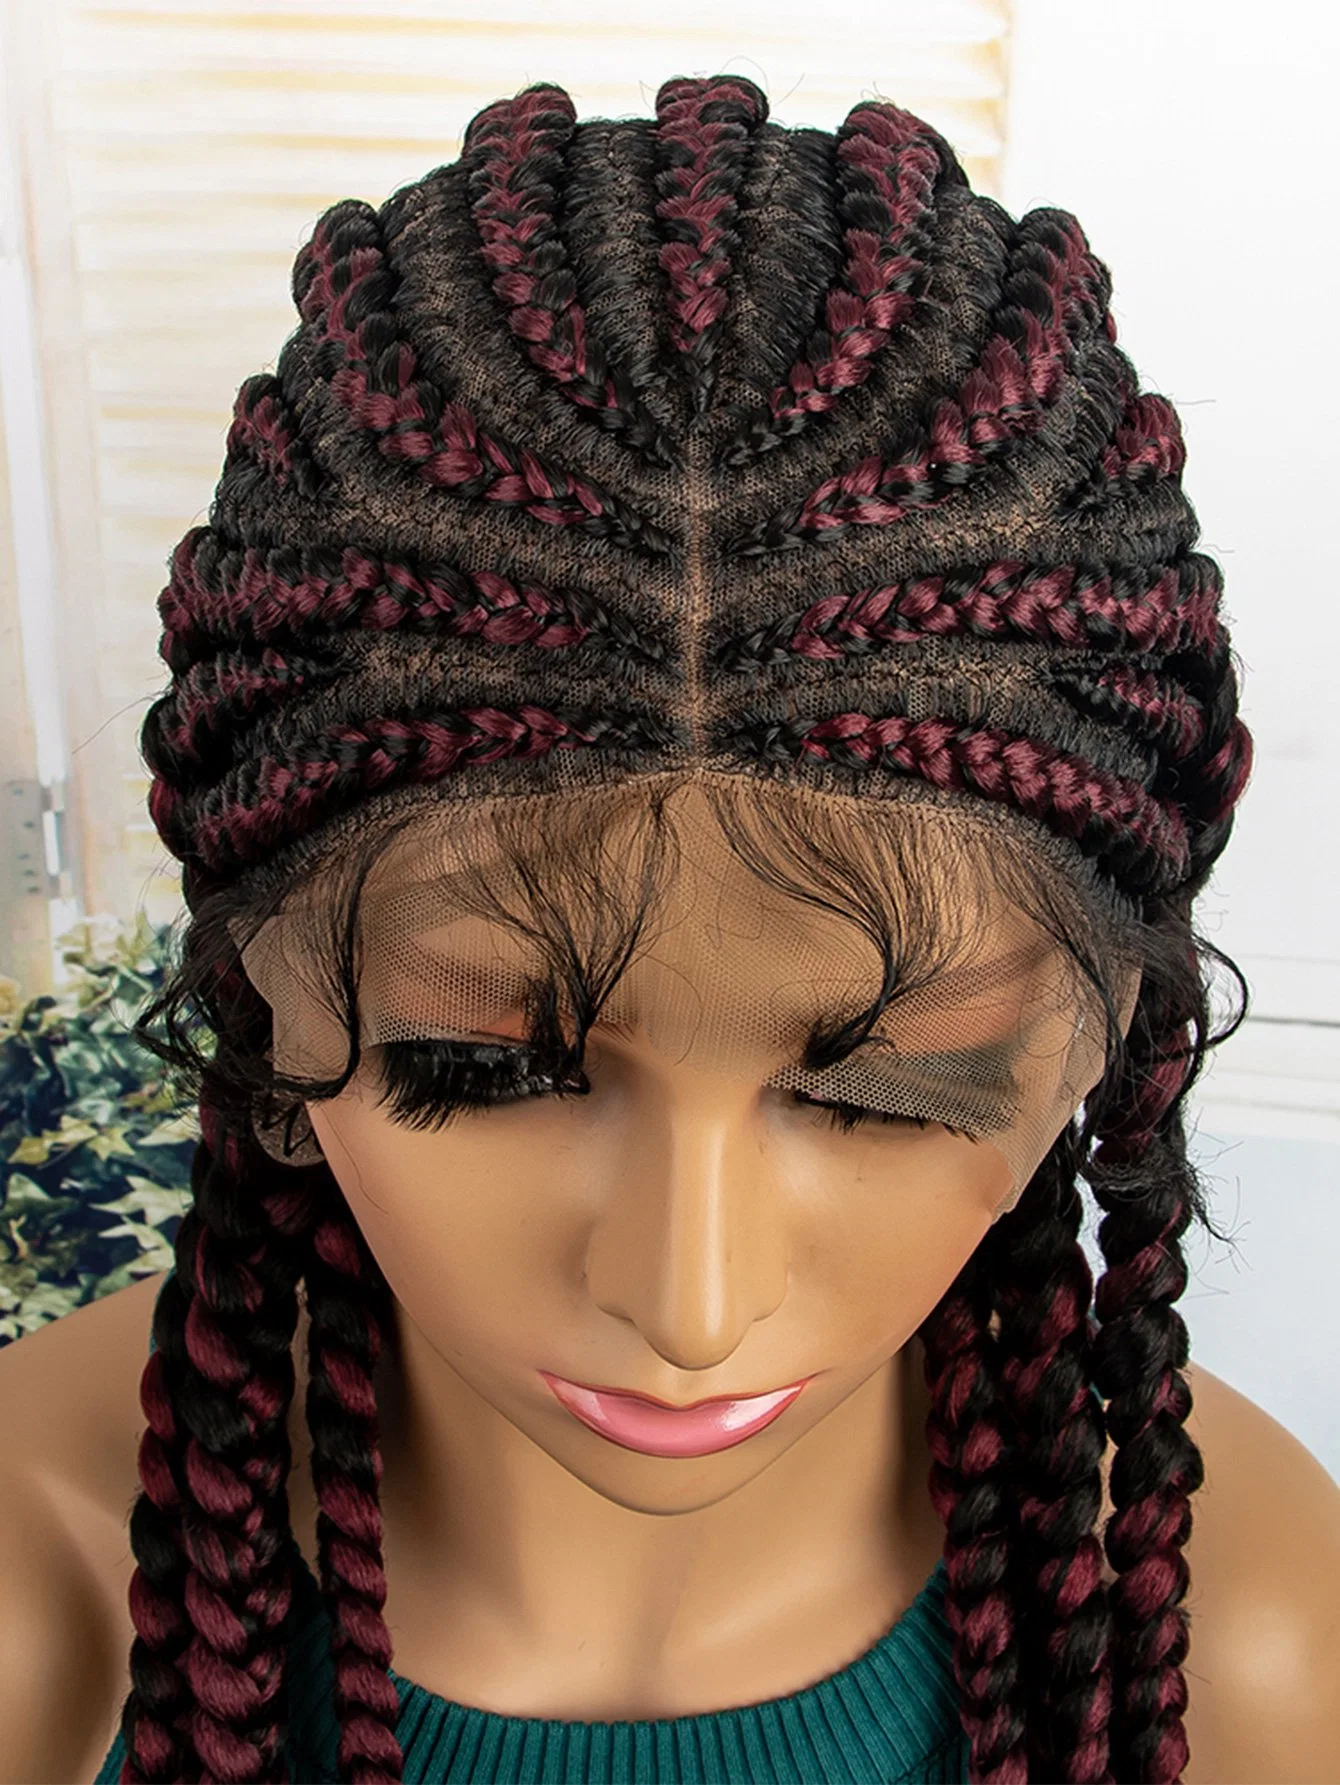 Wholesale Handmade Box Braided Lace Wigs Afro Full Lace Front Braided Wigs